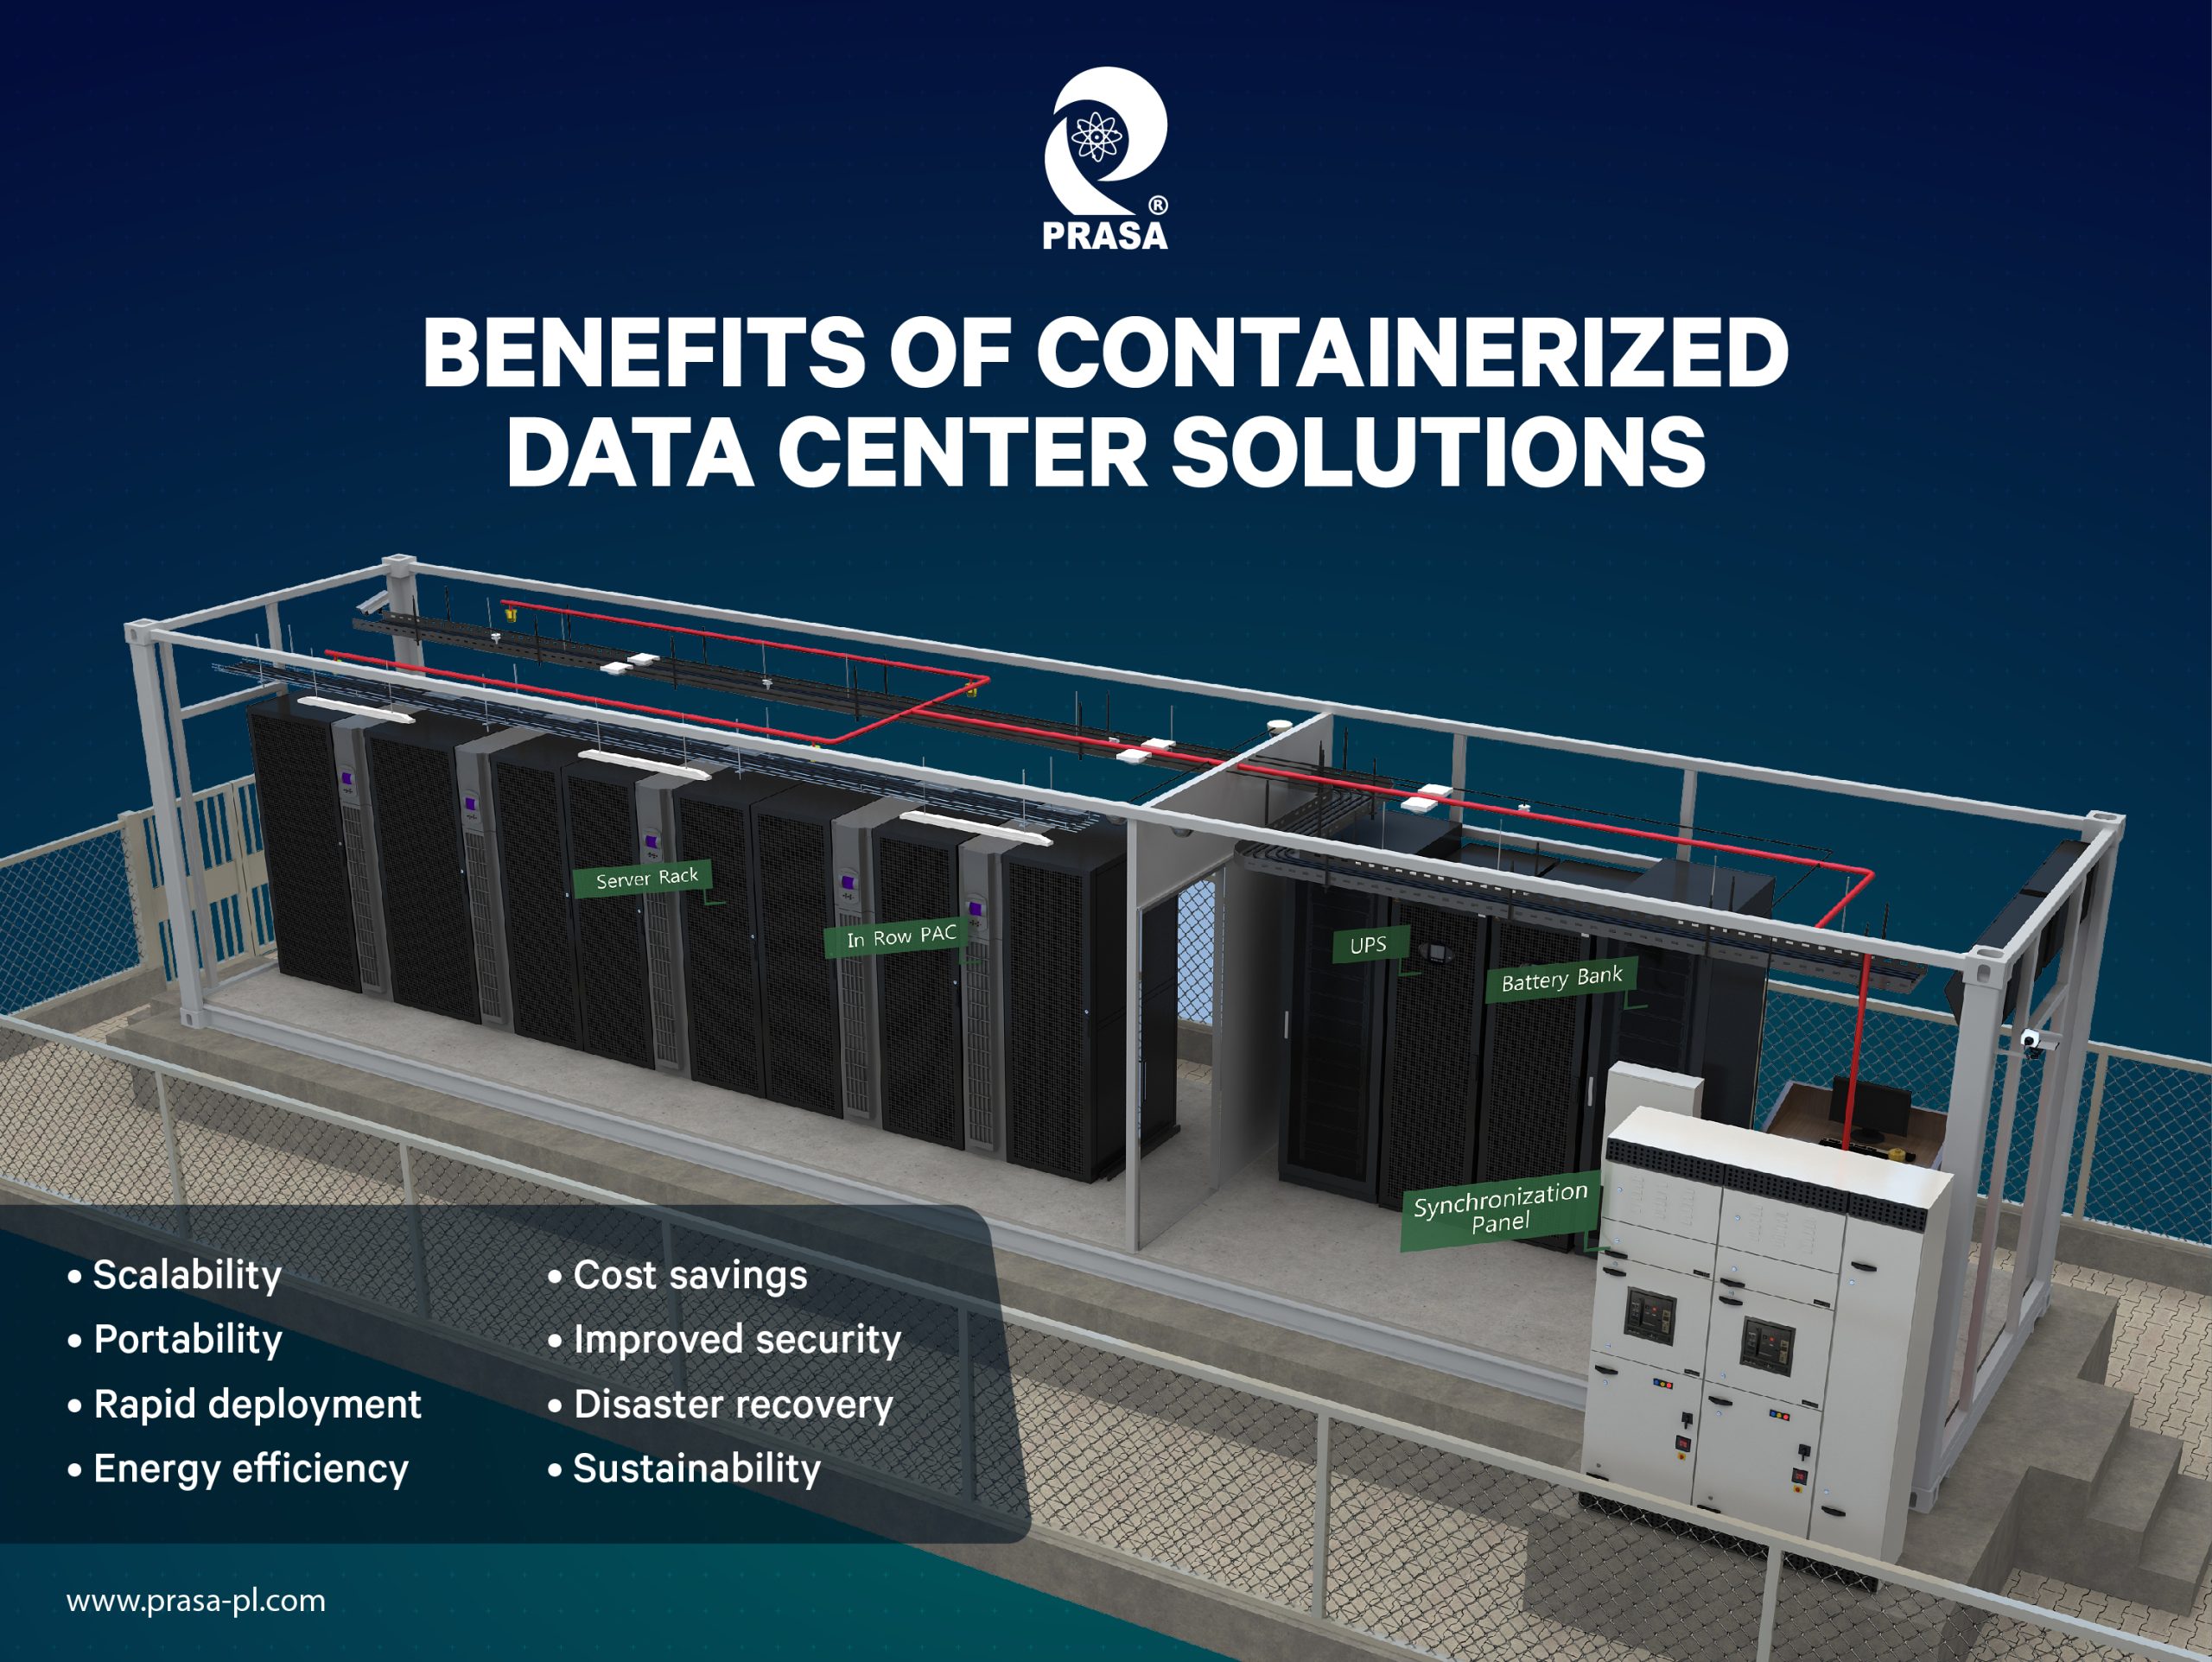 <strong>Benefits of Containerized Data Center Solutions</strong>